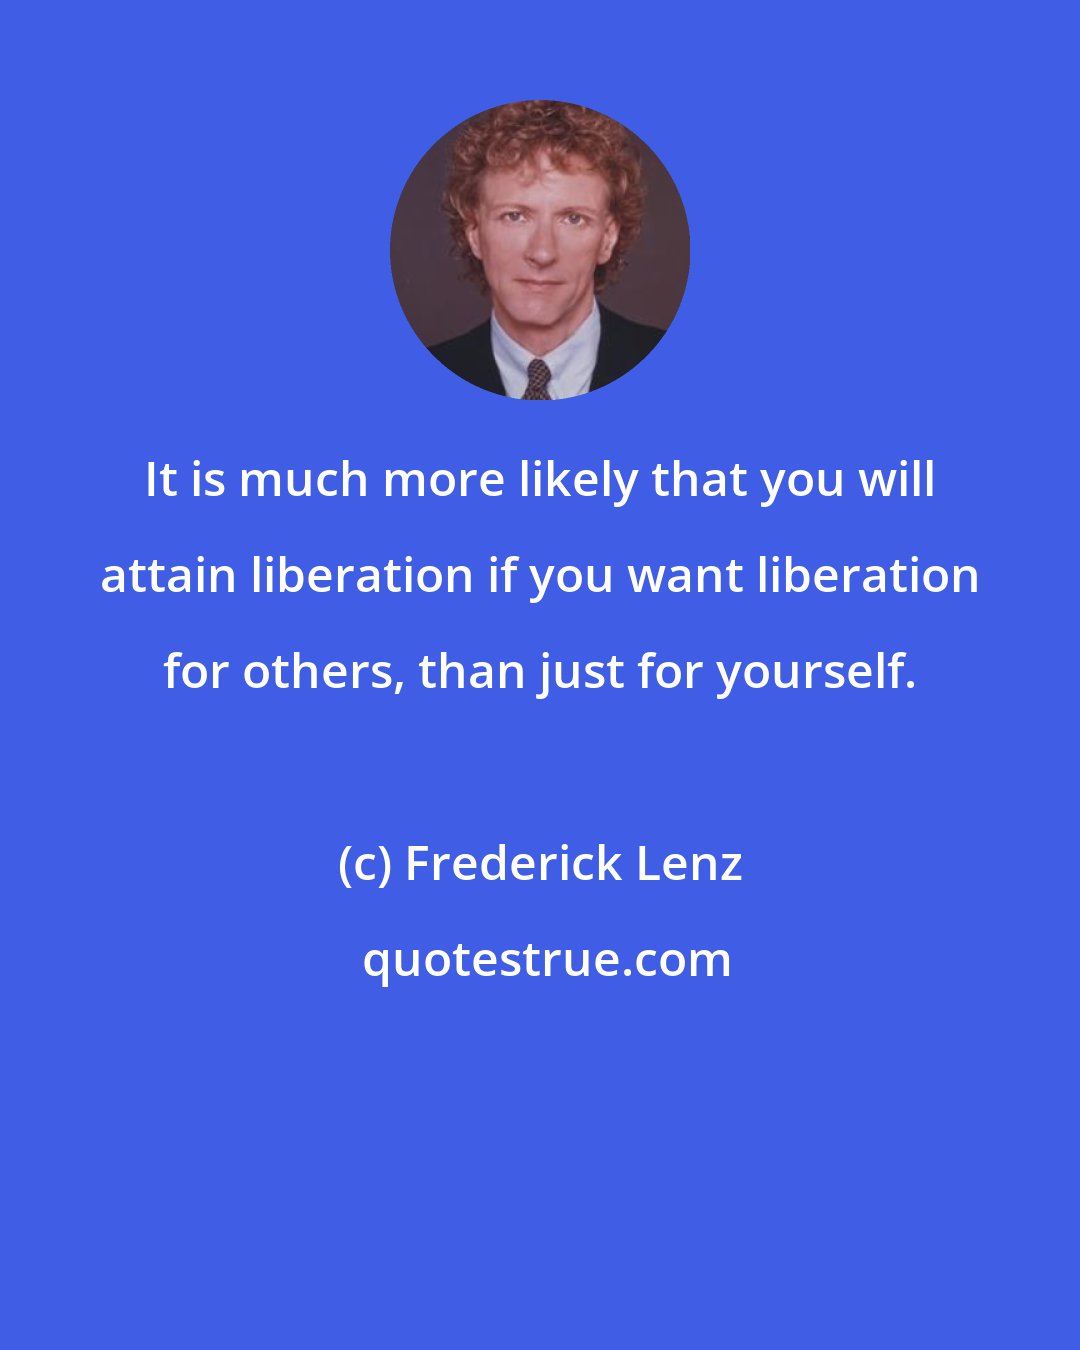 Frederick Lenz: It is much more likely that you will attain liberation if you want liberation for others, than just for yourself.